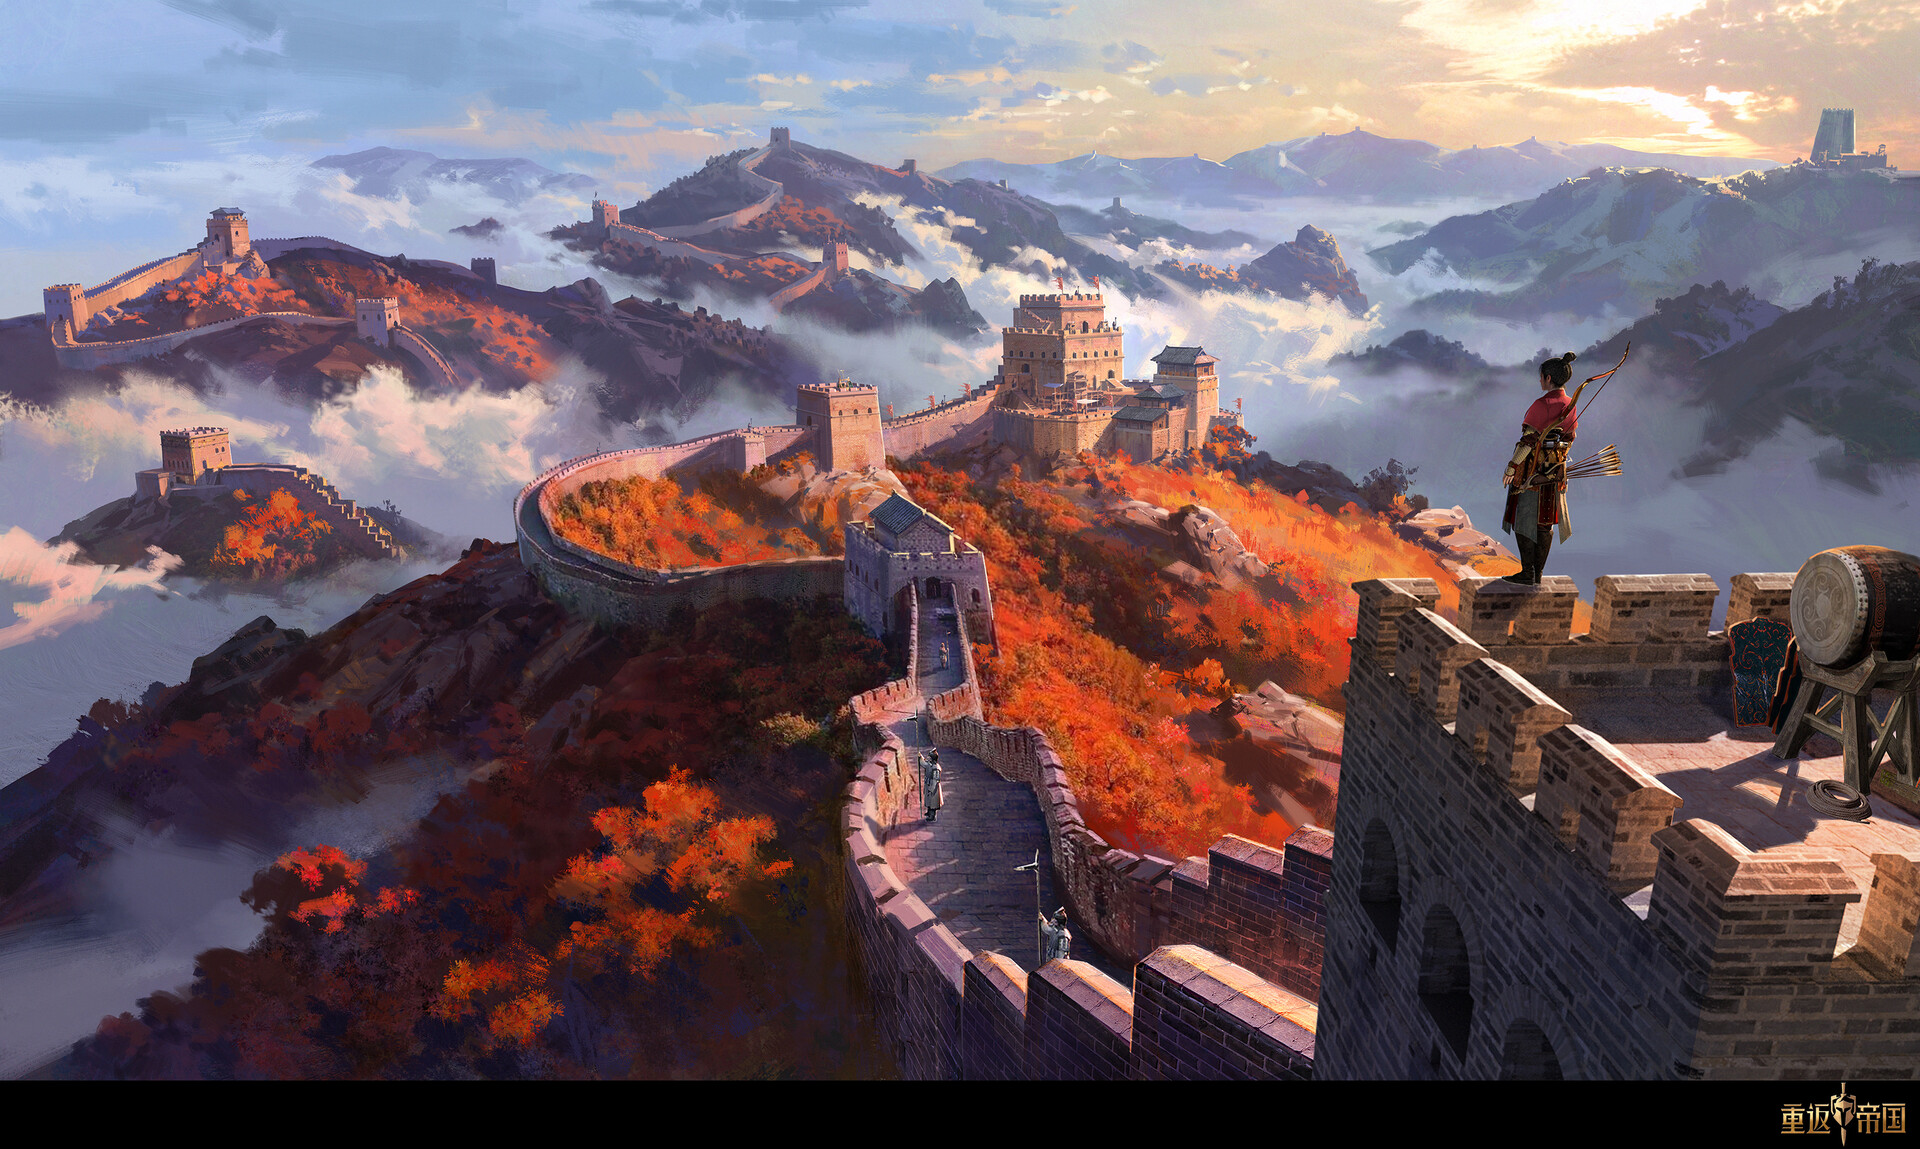 Artwork Digital Art Great Wall Of China Nature Mountains Clouds 1920x1149